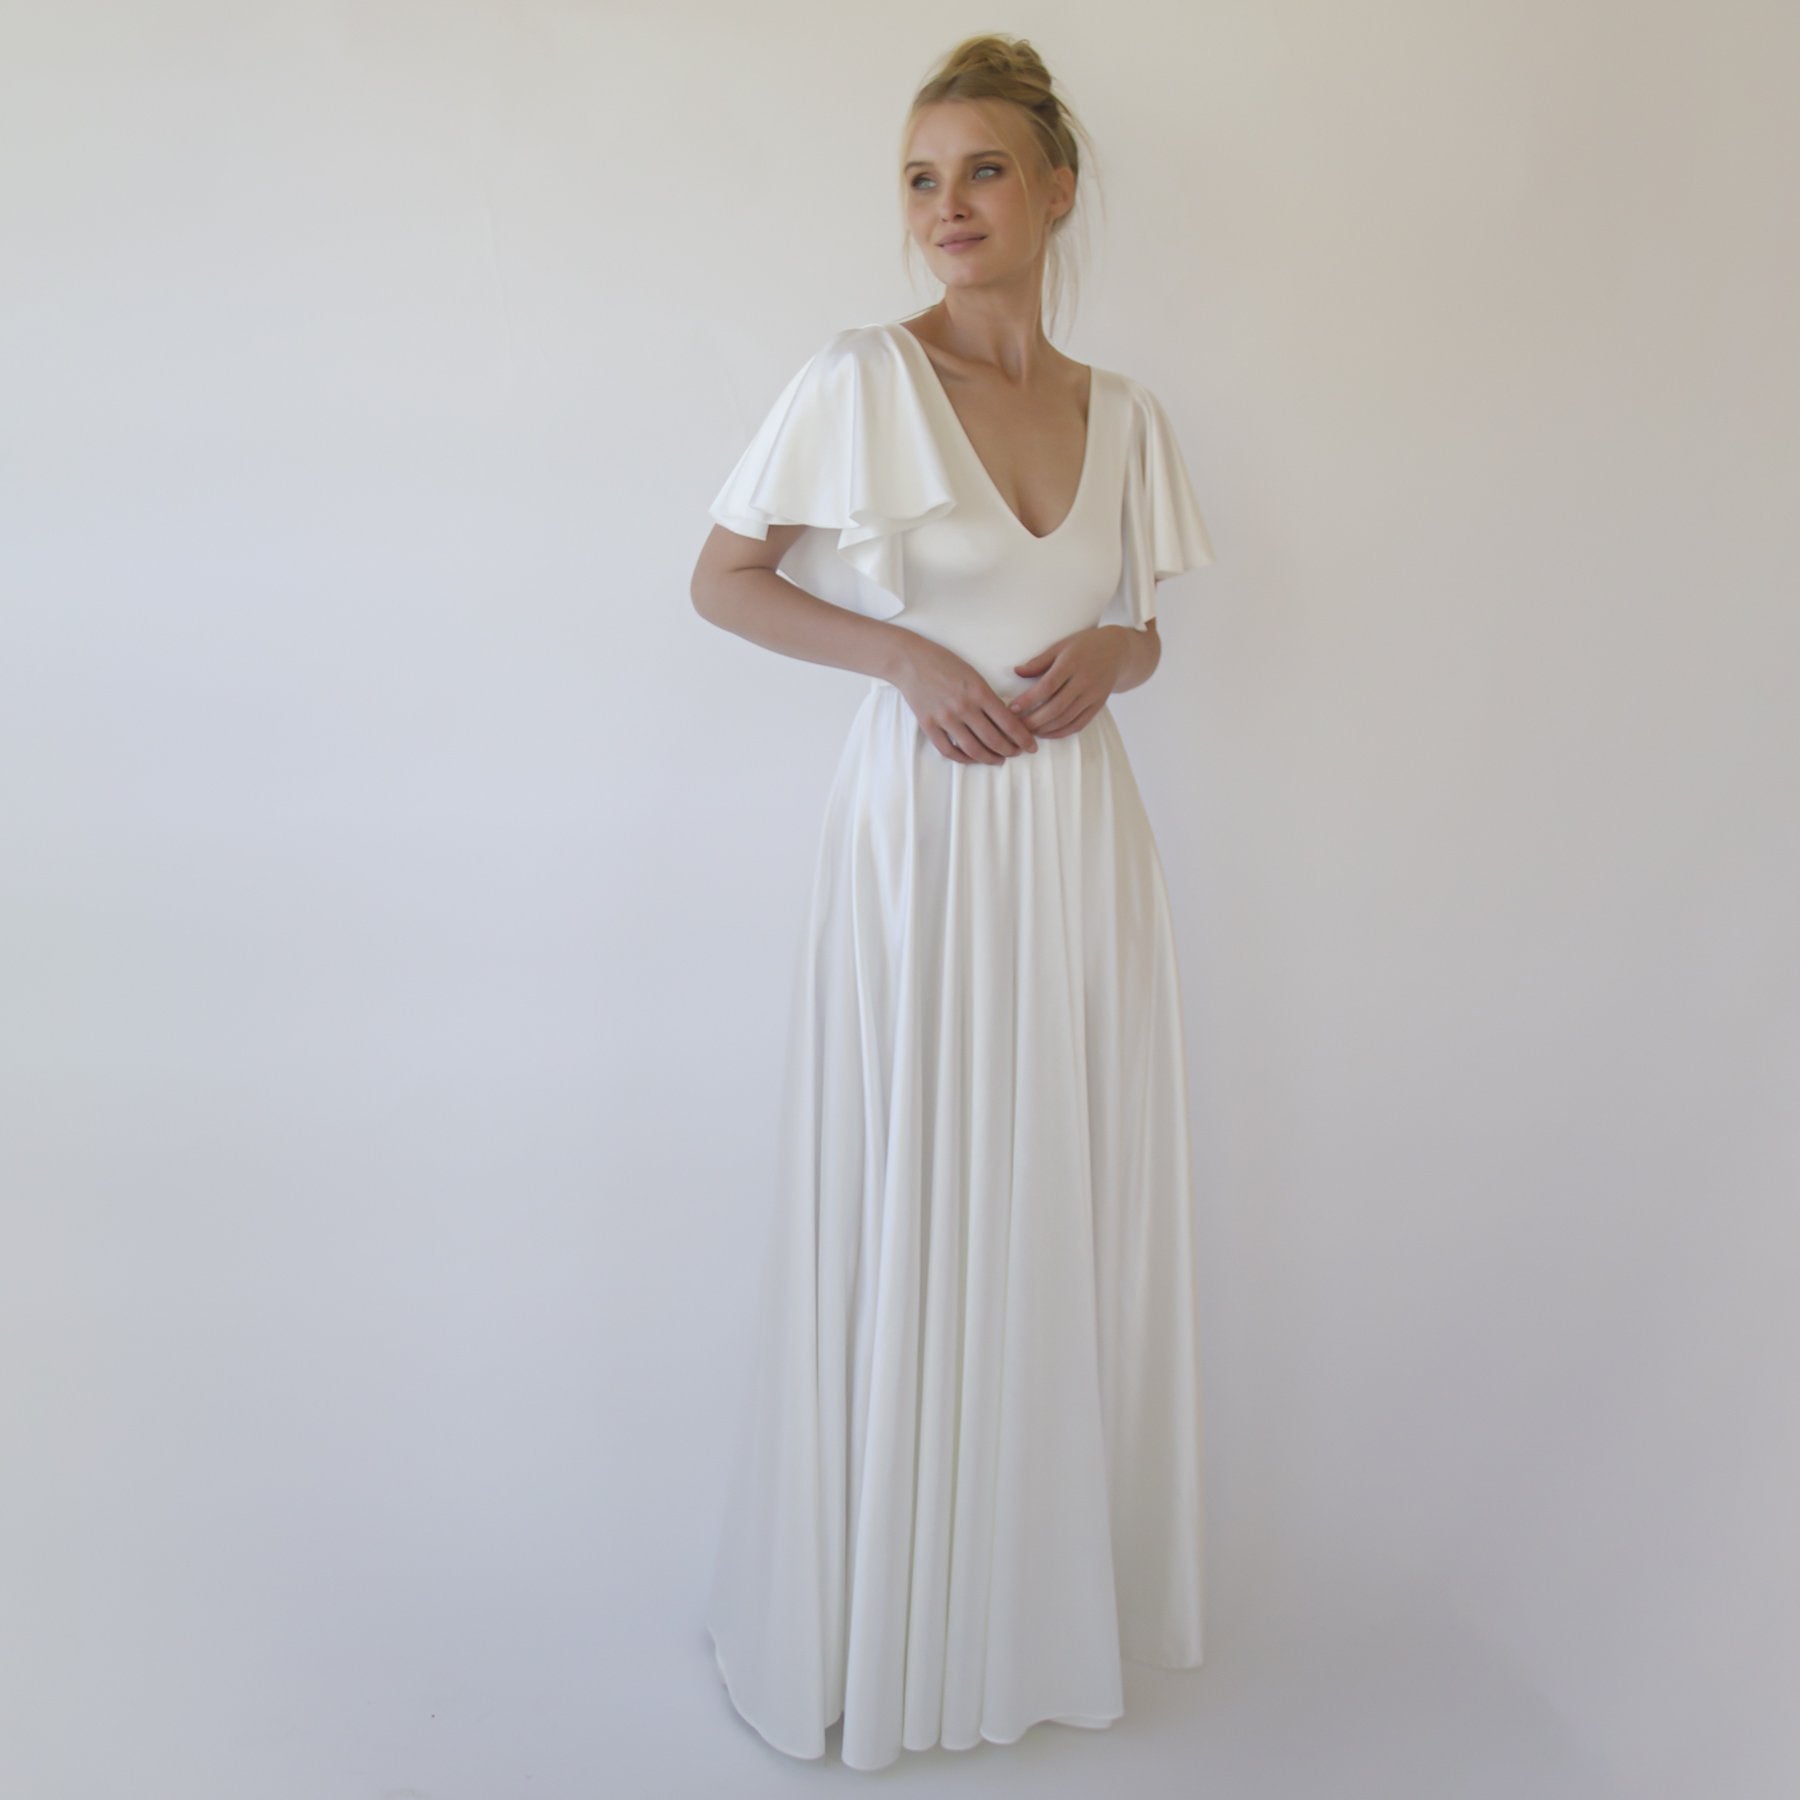 White Maxi Dress - High Slit Dress - Ivory Dress With Butterfly Sleeves